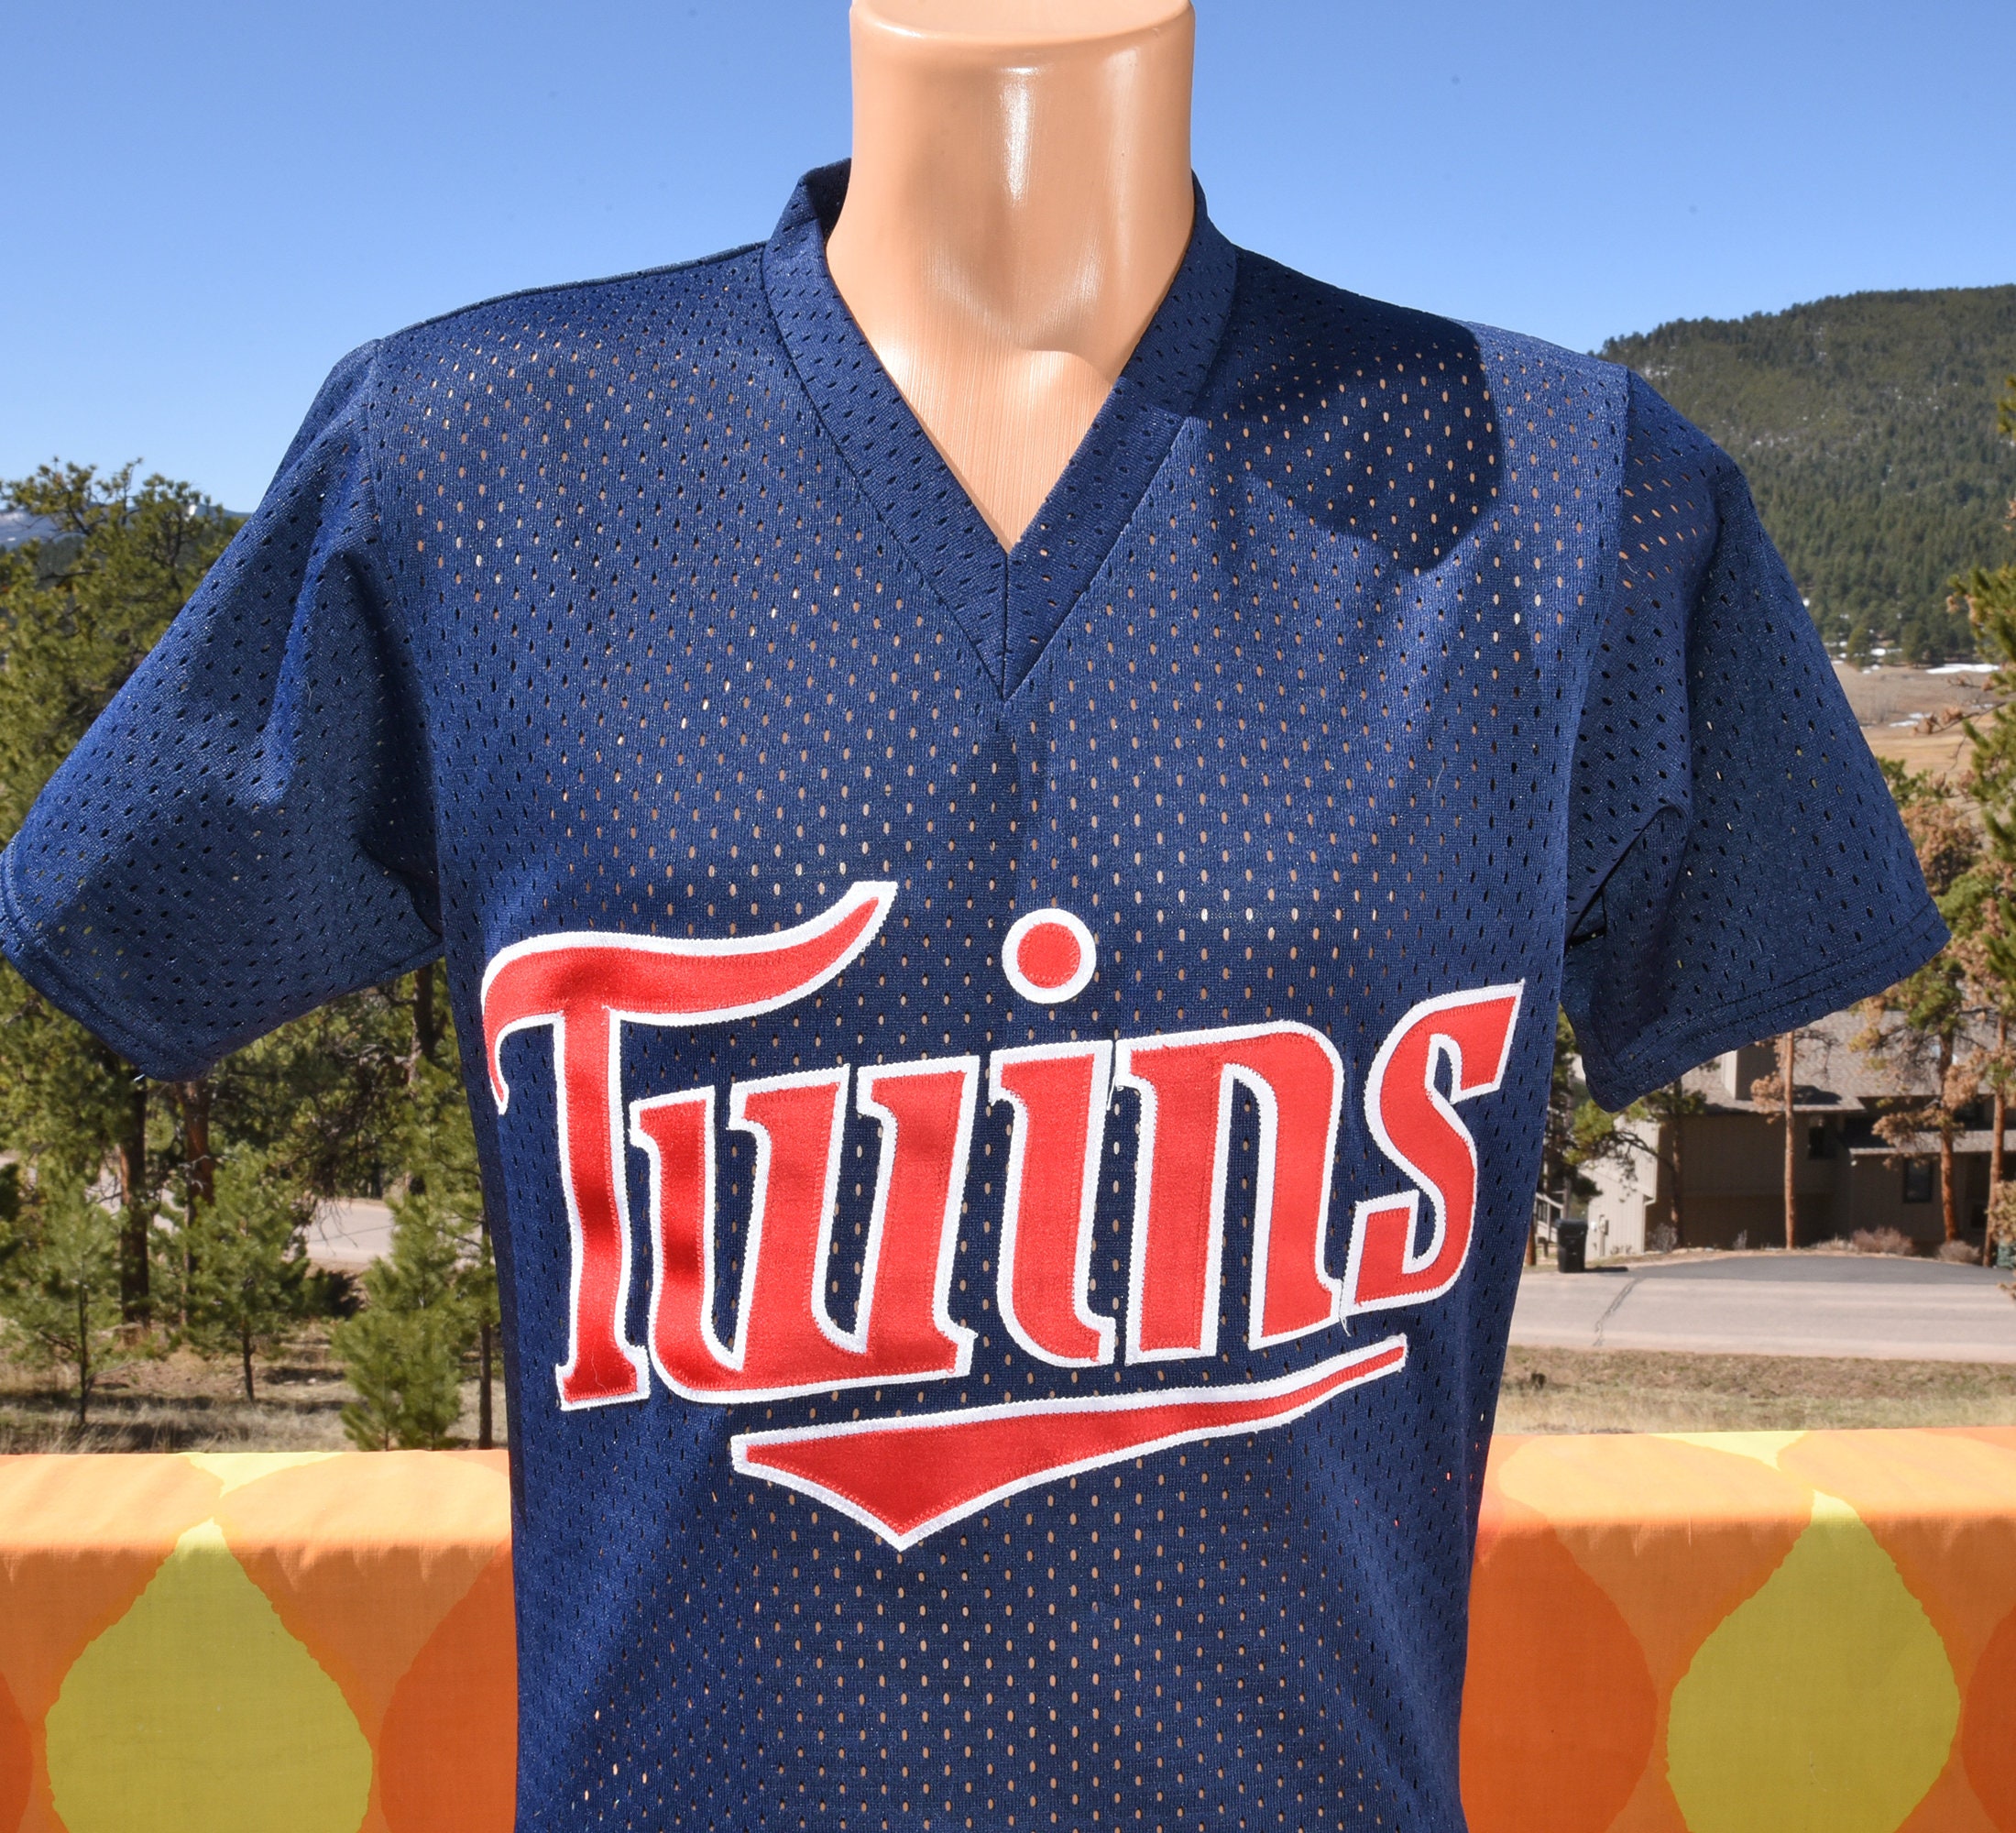 Minnesota Twins 80s "Cooperstown" Throwback ROAD Jersey by  Majestic